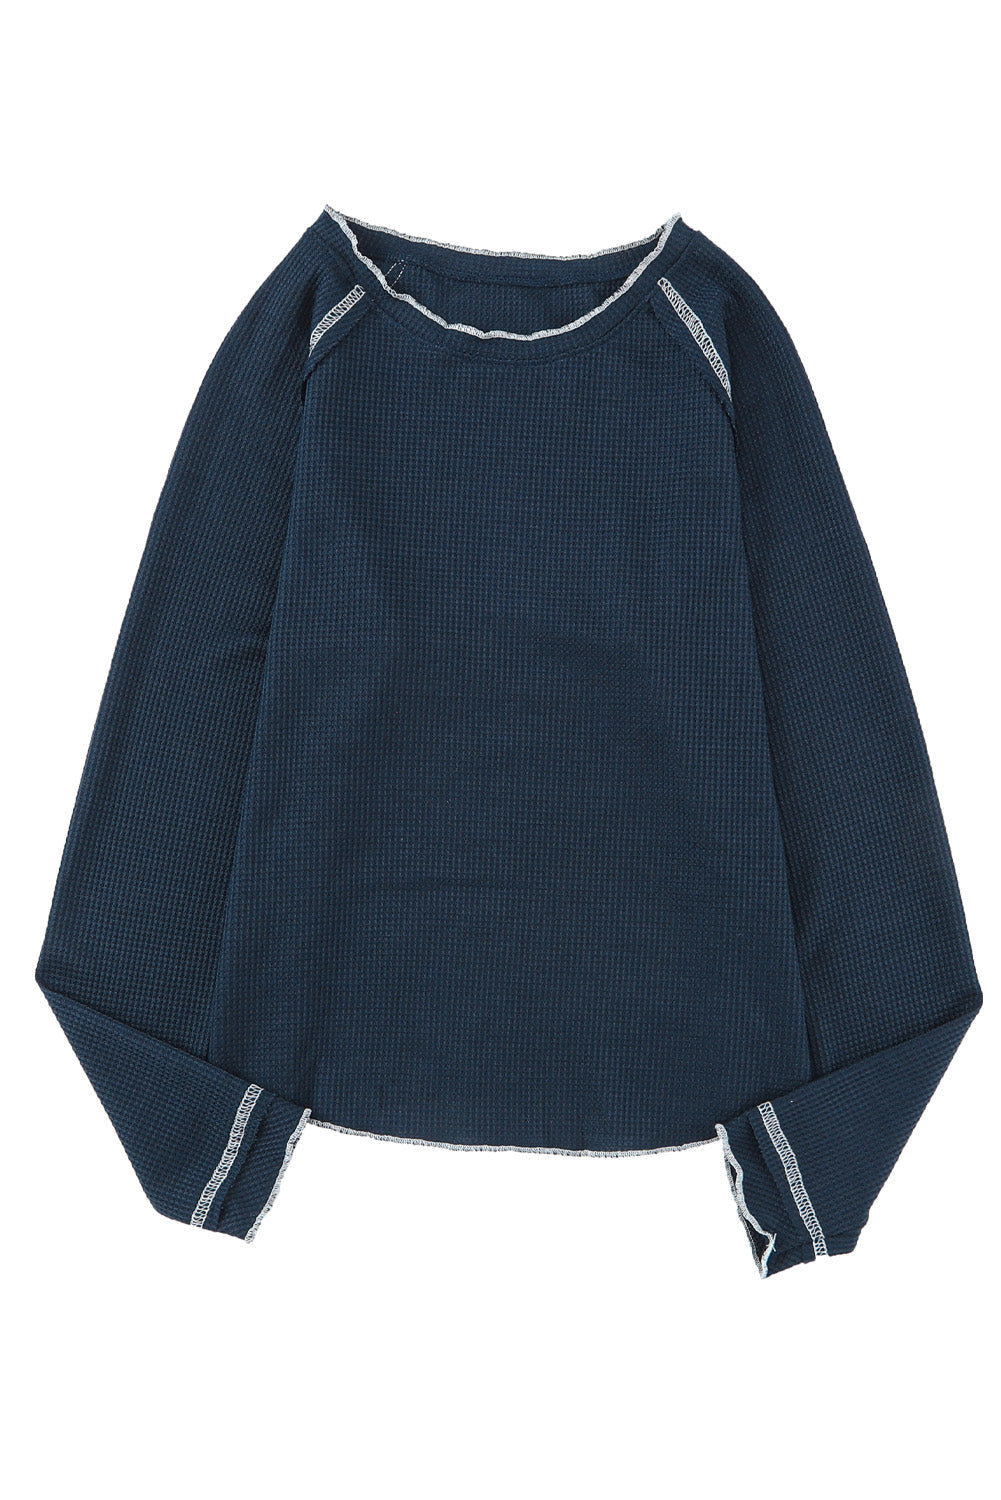 Navy Blue Long Sleeve Exposed Seam Lightweight Waffle Knit Top